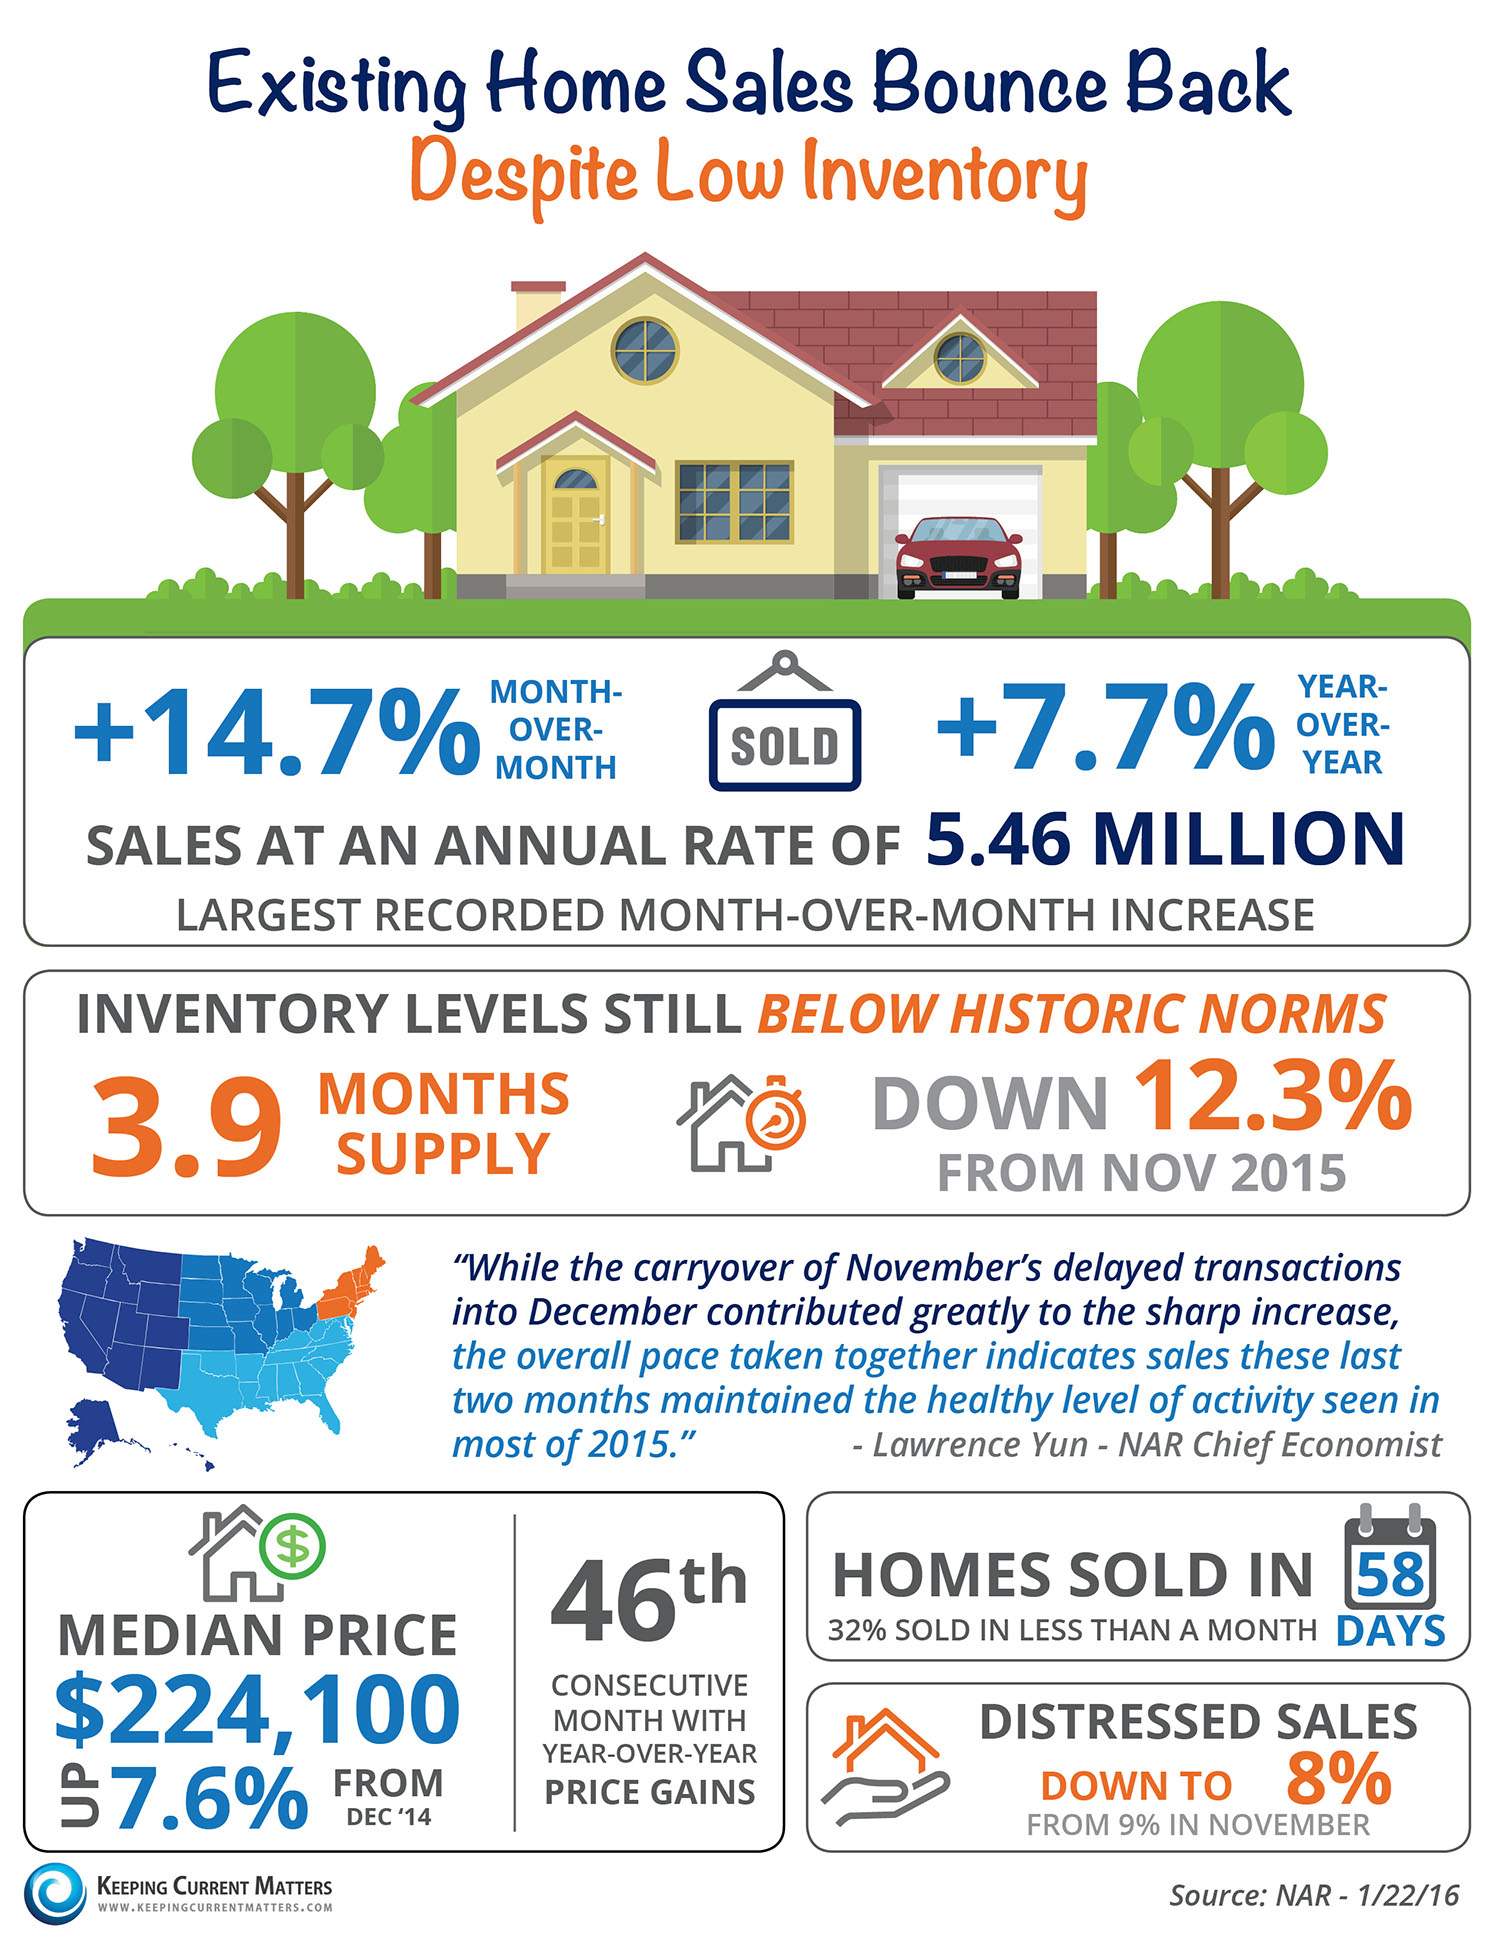 Existing Home Sales Bounce Back [INFOGRAPHIC] | Keeping Current Matters